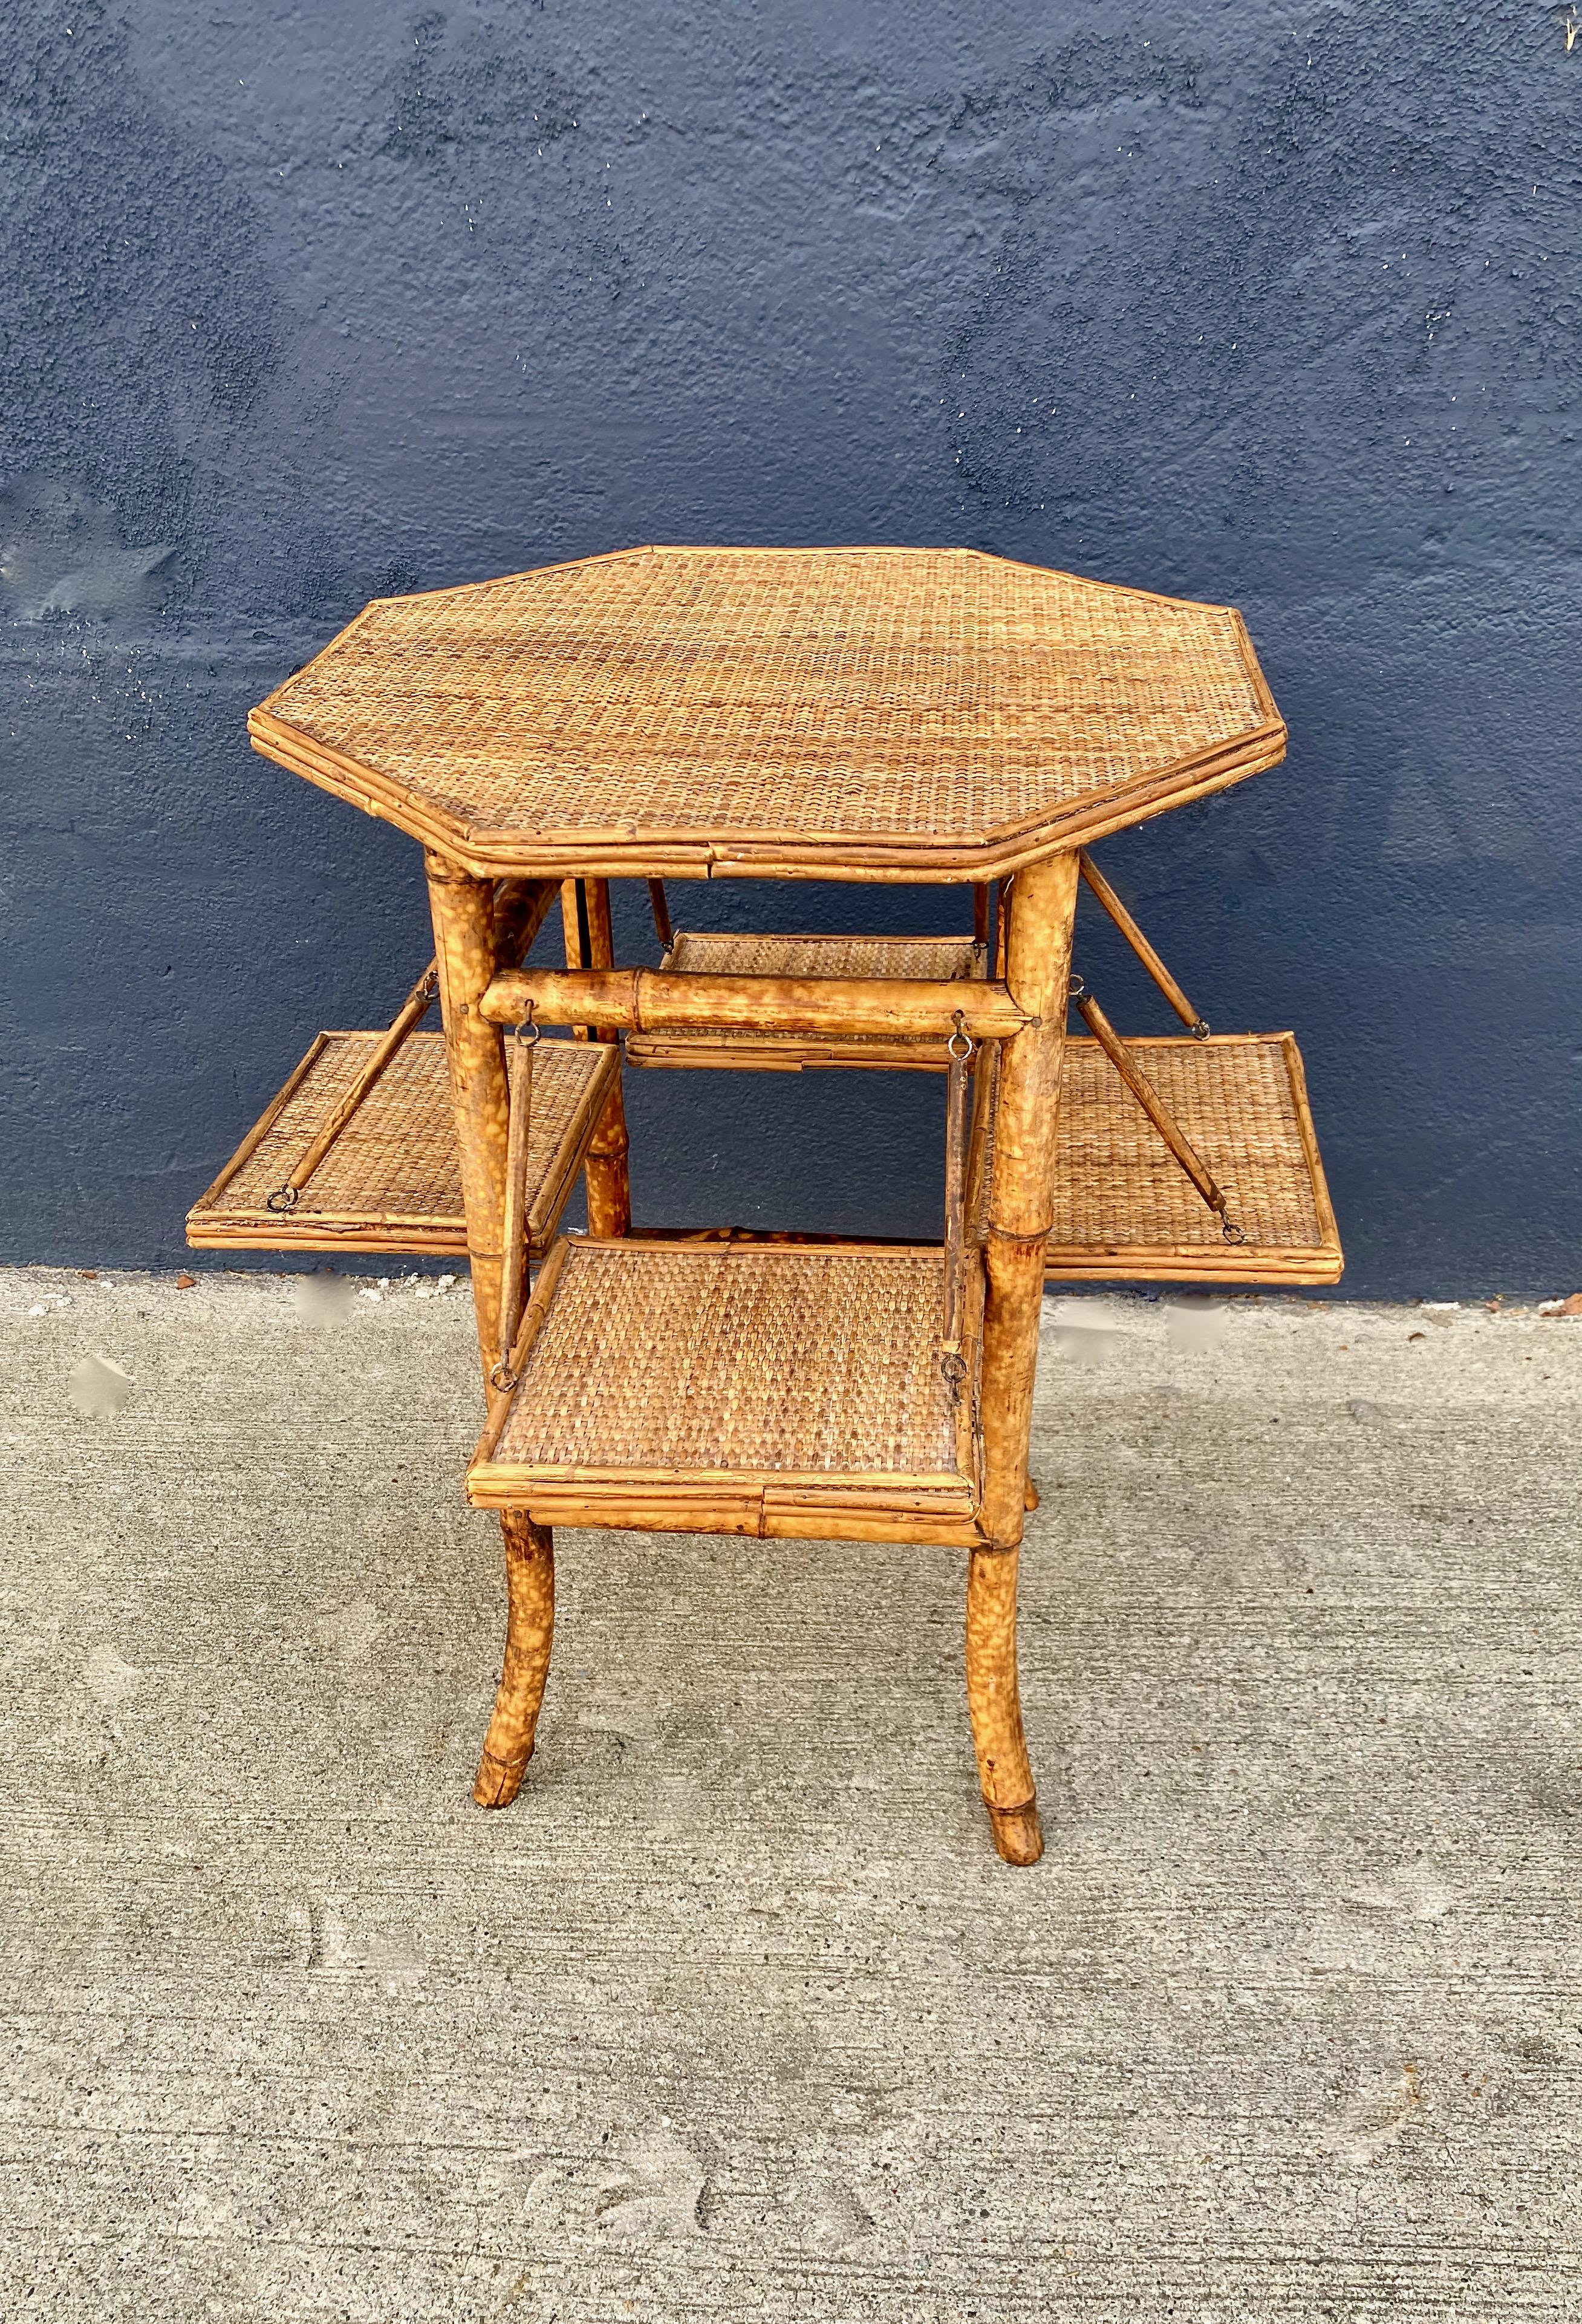 Aesthetic Movement English Rattan and Bamboo Tea Table, C. 1900-1920 For Sale